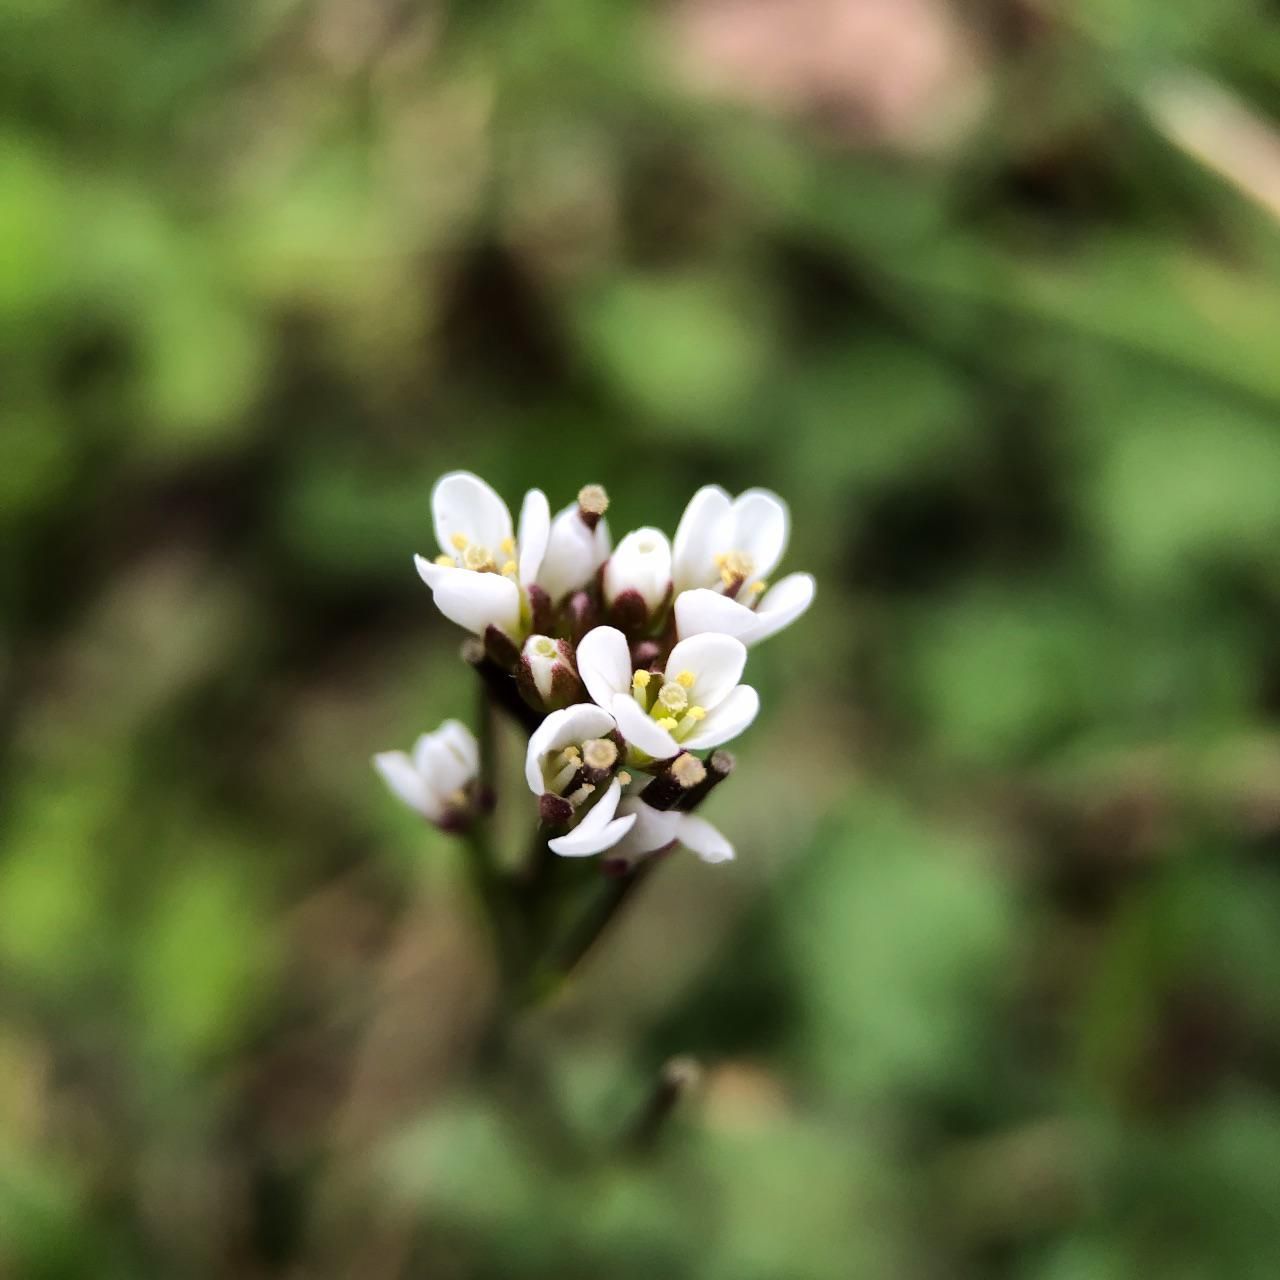 A small, white flower, photographed on an iPhone.